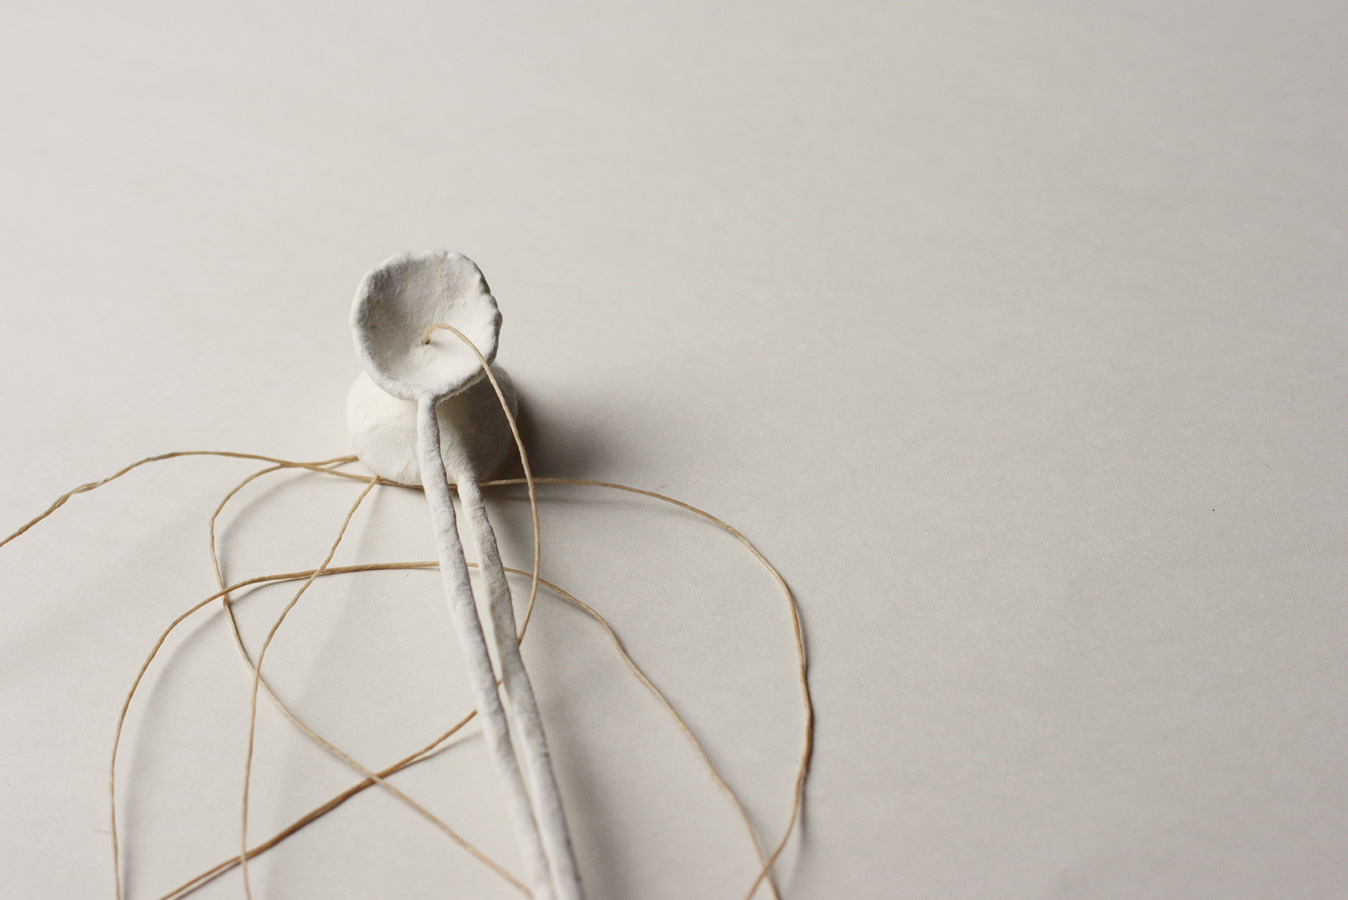 A Love Story, 2008. waxed thread through paper over wire. 22.5 x 3 cm together